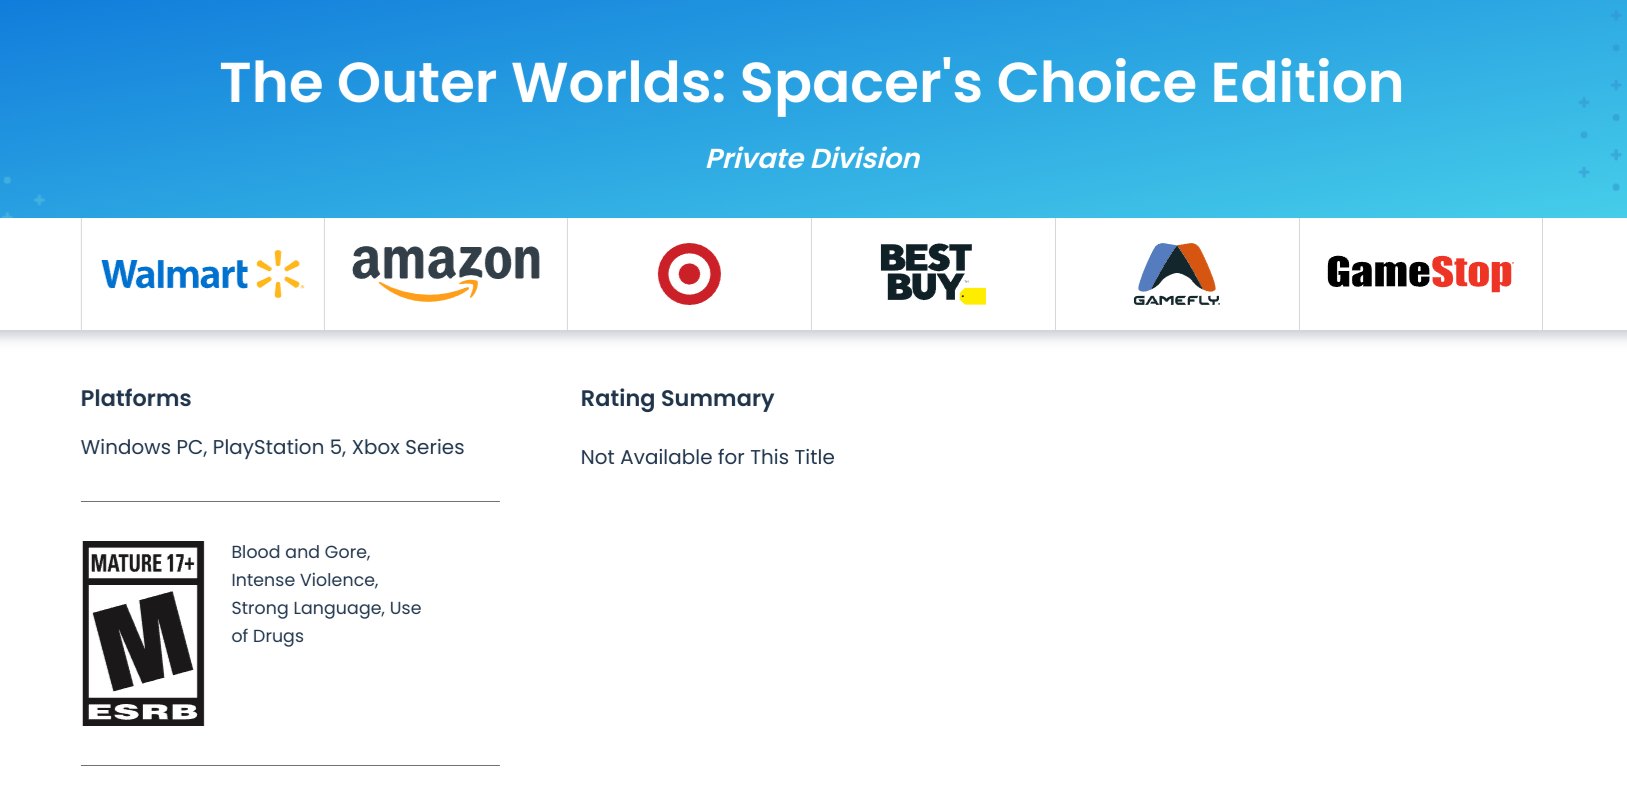 ESRB Rating for The Outer Worlds: Spacers Choice Edition